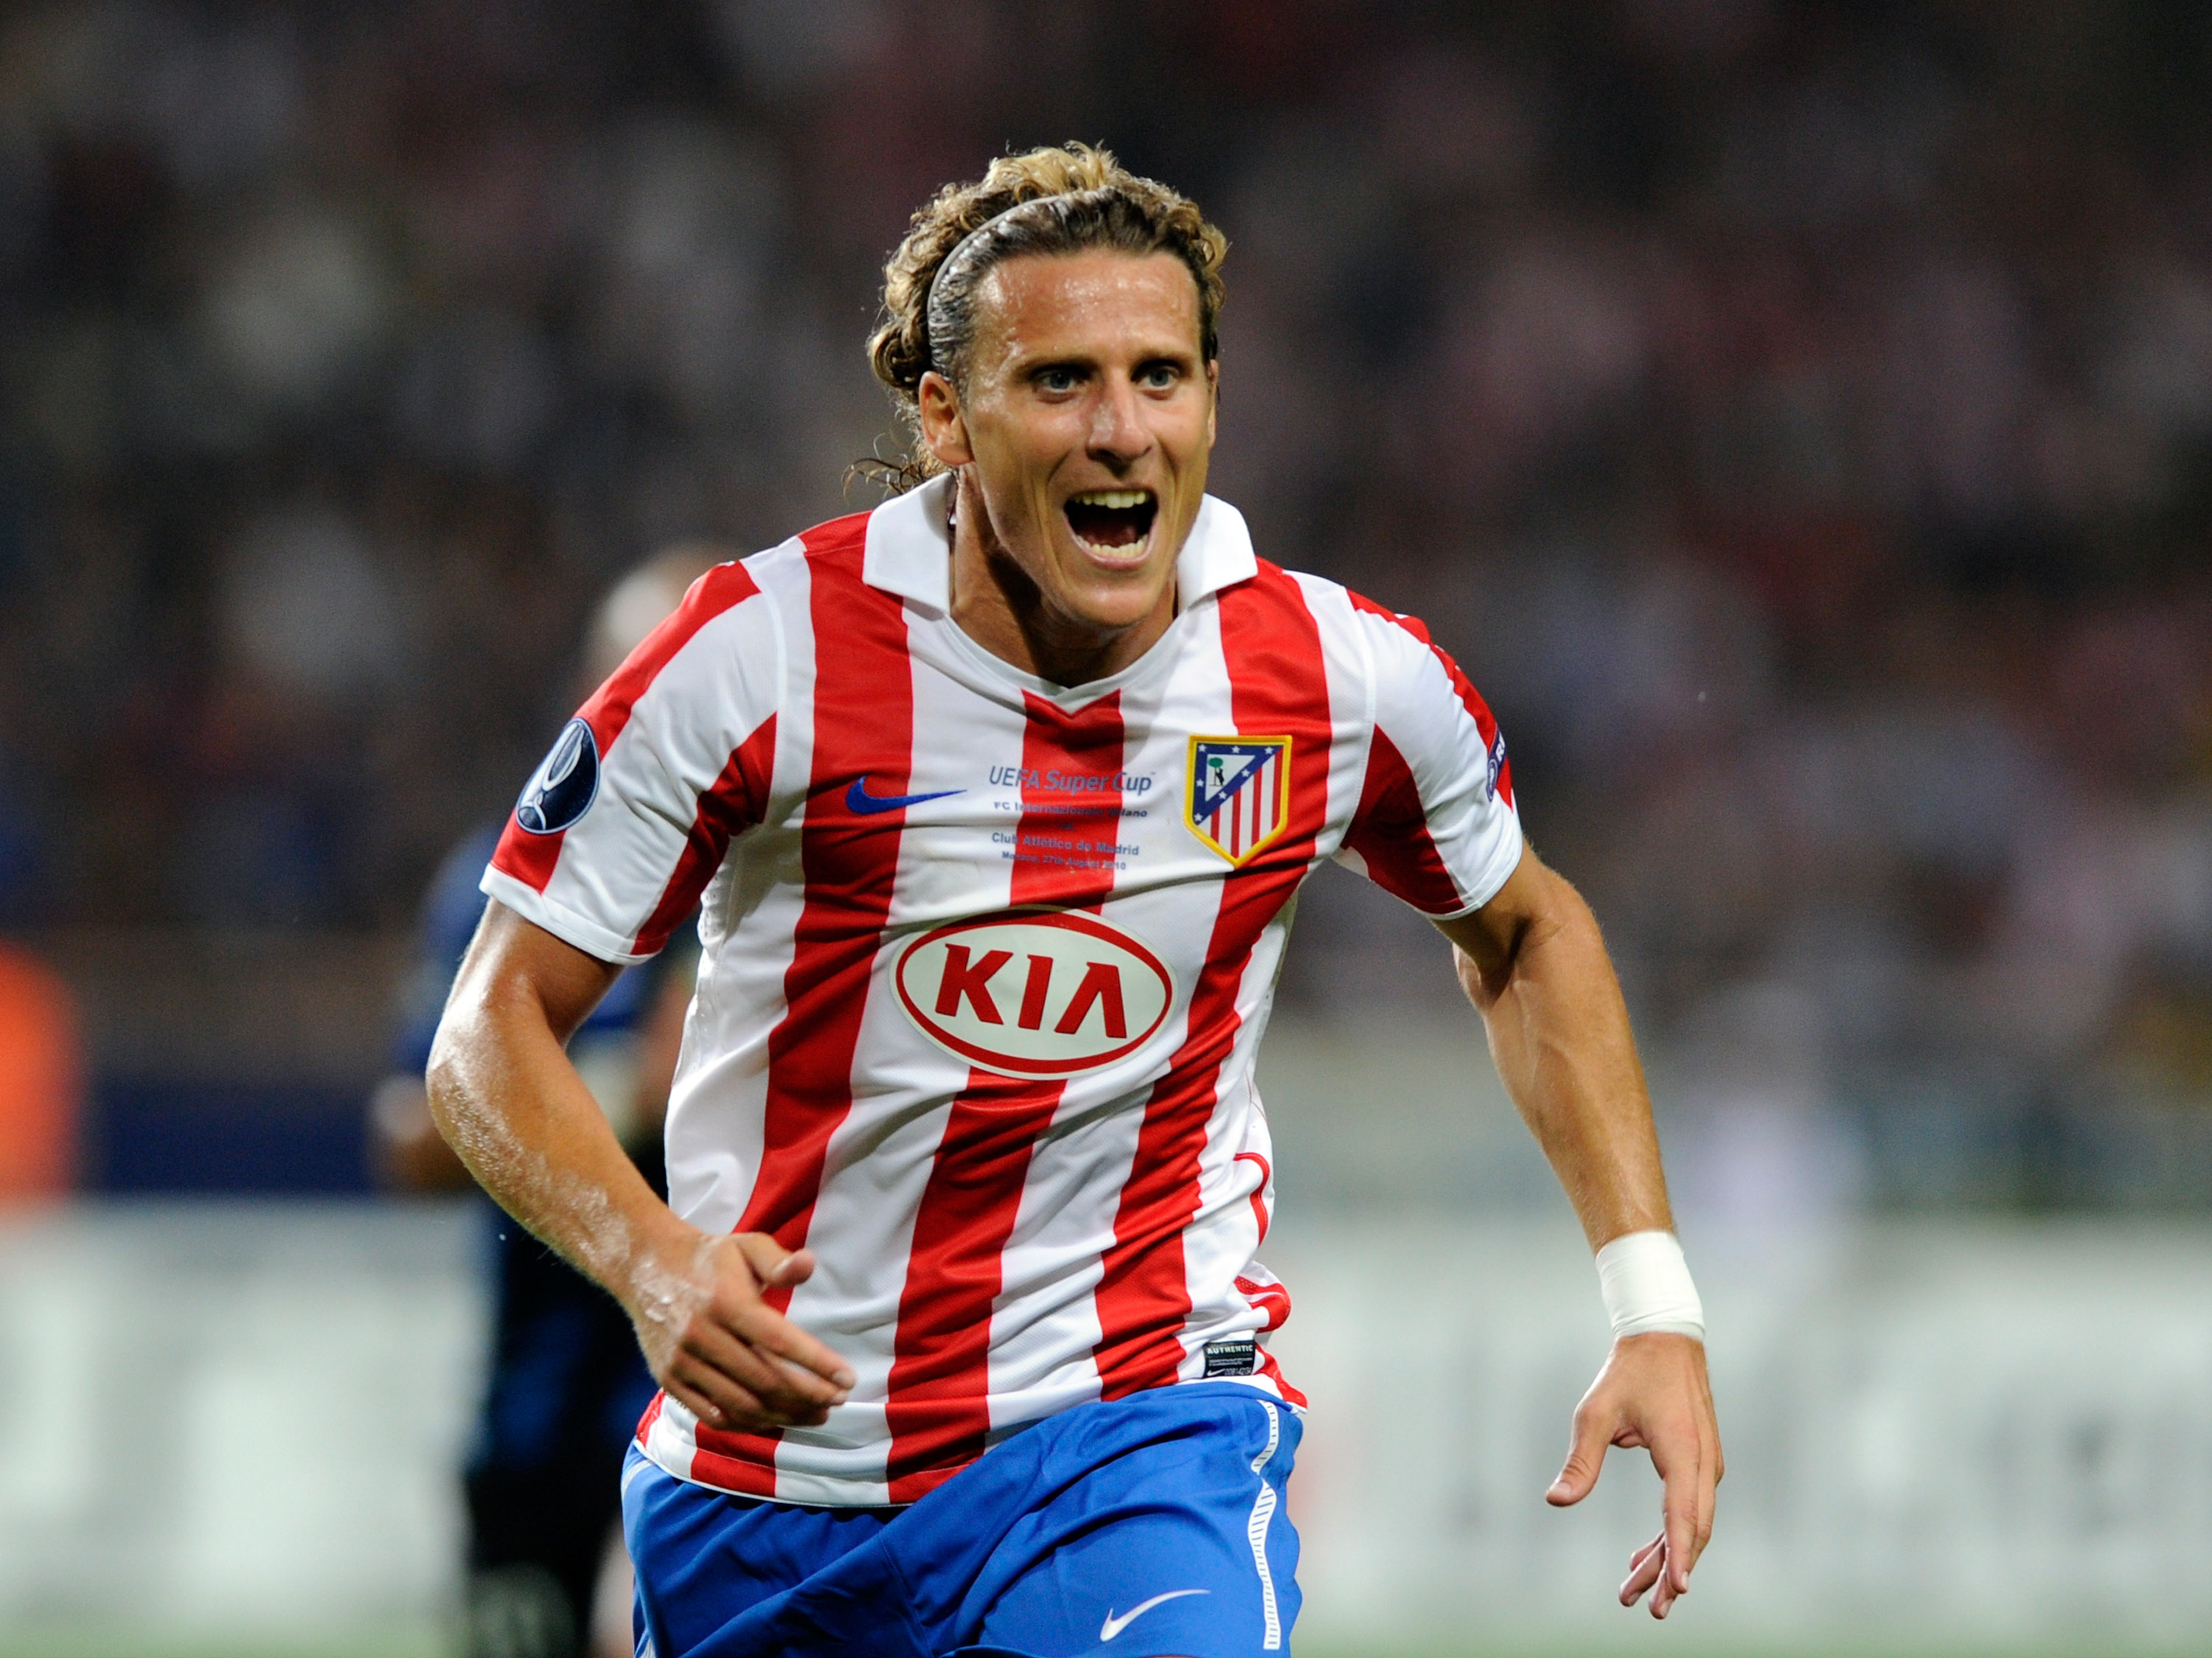 MONACO - AUGUST 27:  Diego Forlan of Atletico Madrid competes for the ball during the UEFA Super Cup between Inter and Atletico Madrid at Louis II Stadium on August 27, 2010 in Monaco, Monaco.  (Photo by Claudio Villa/Getty Images)